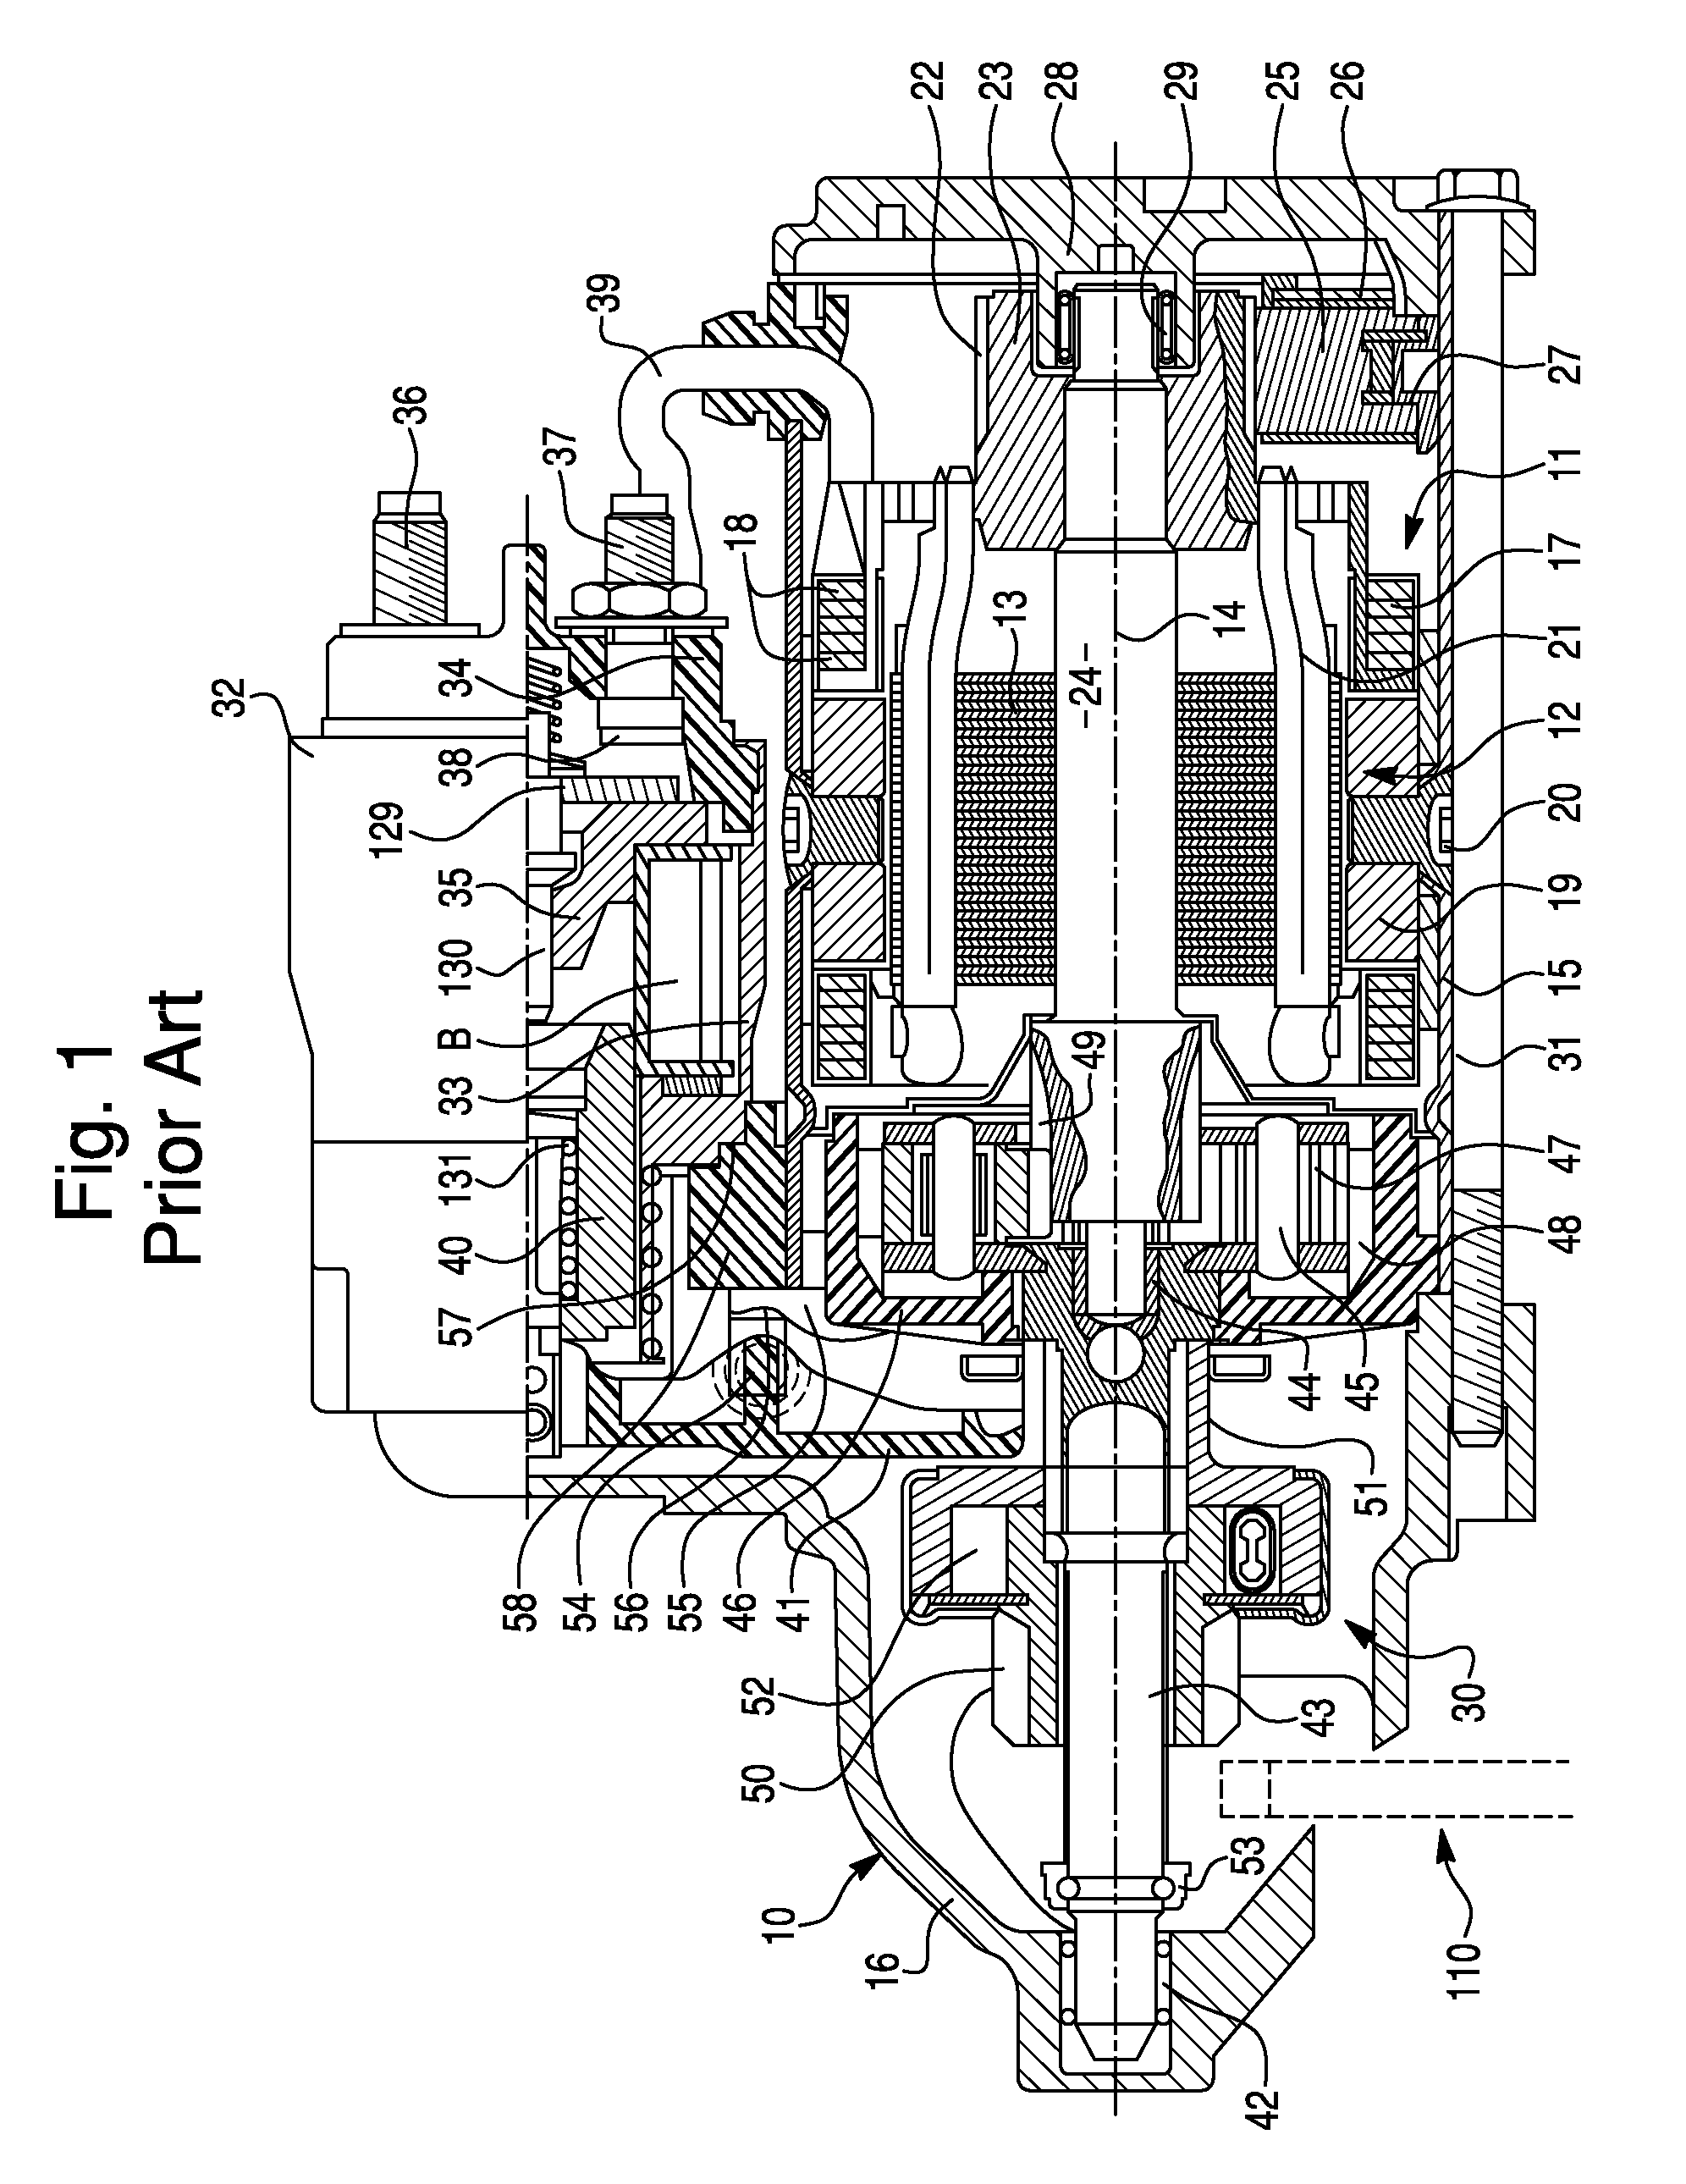 Device for controlling a heat engine starter, such as that of a motor vehicle, and starter comprising one such device